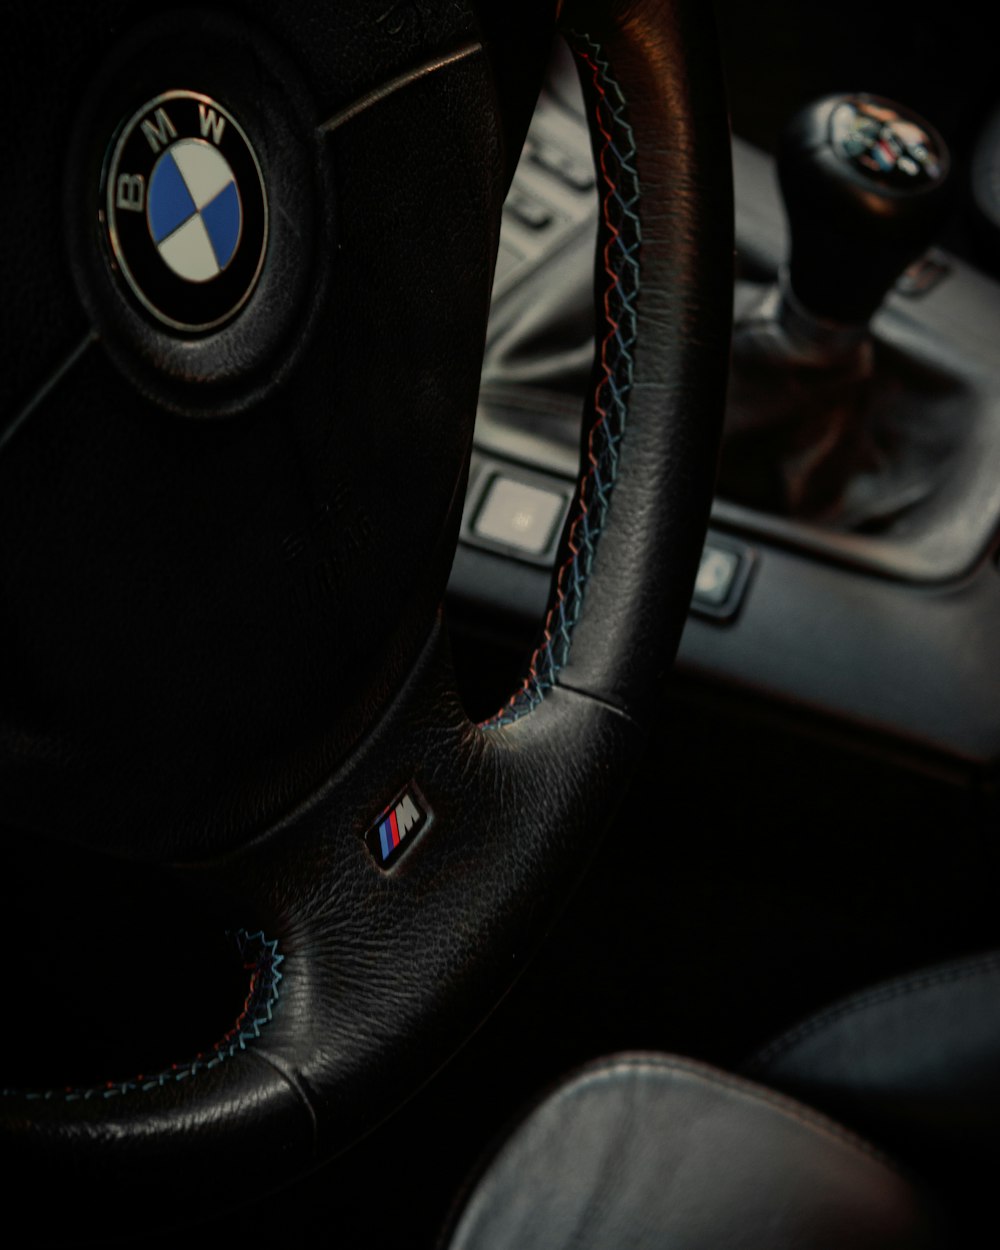 the steering wheel of a car with a bmw emblem on it